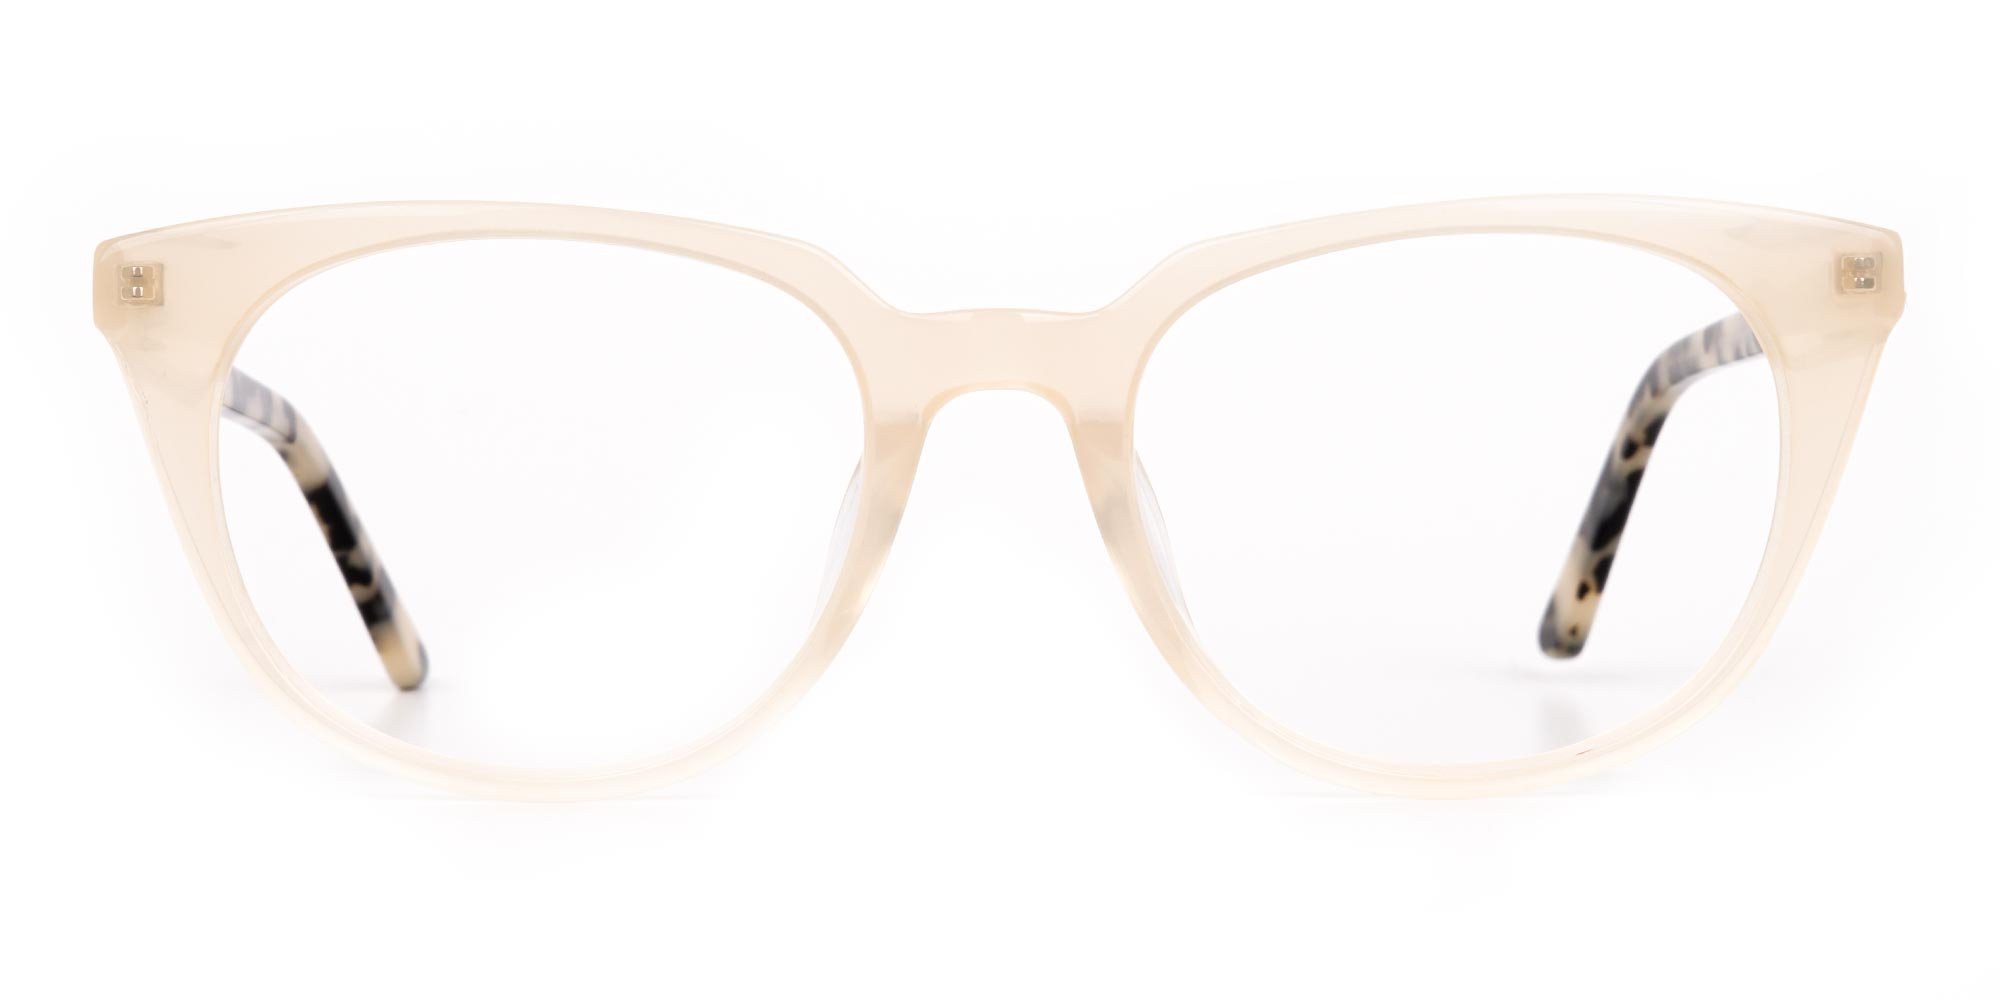 Creamy Brown Translucent Glasses Trends